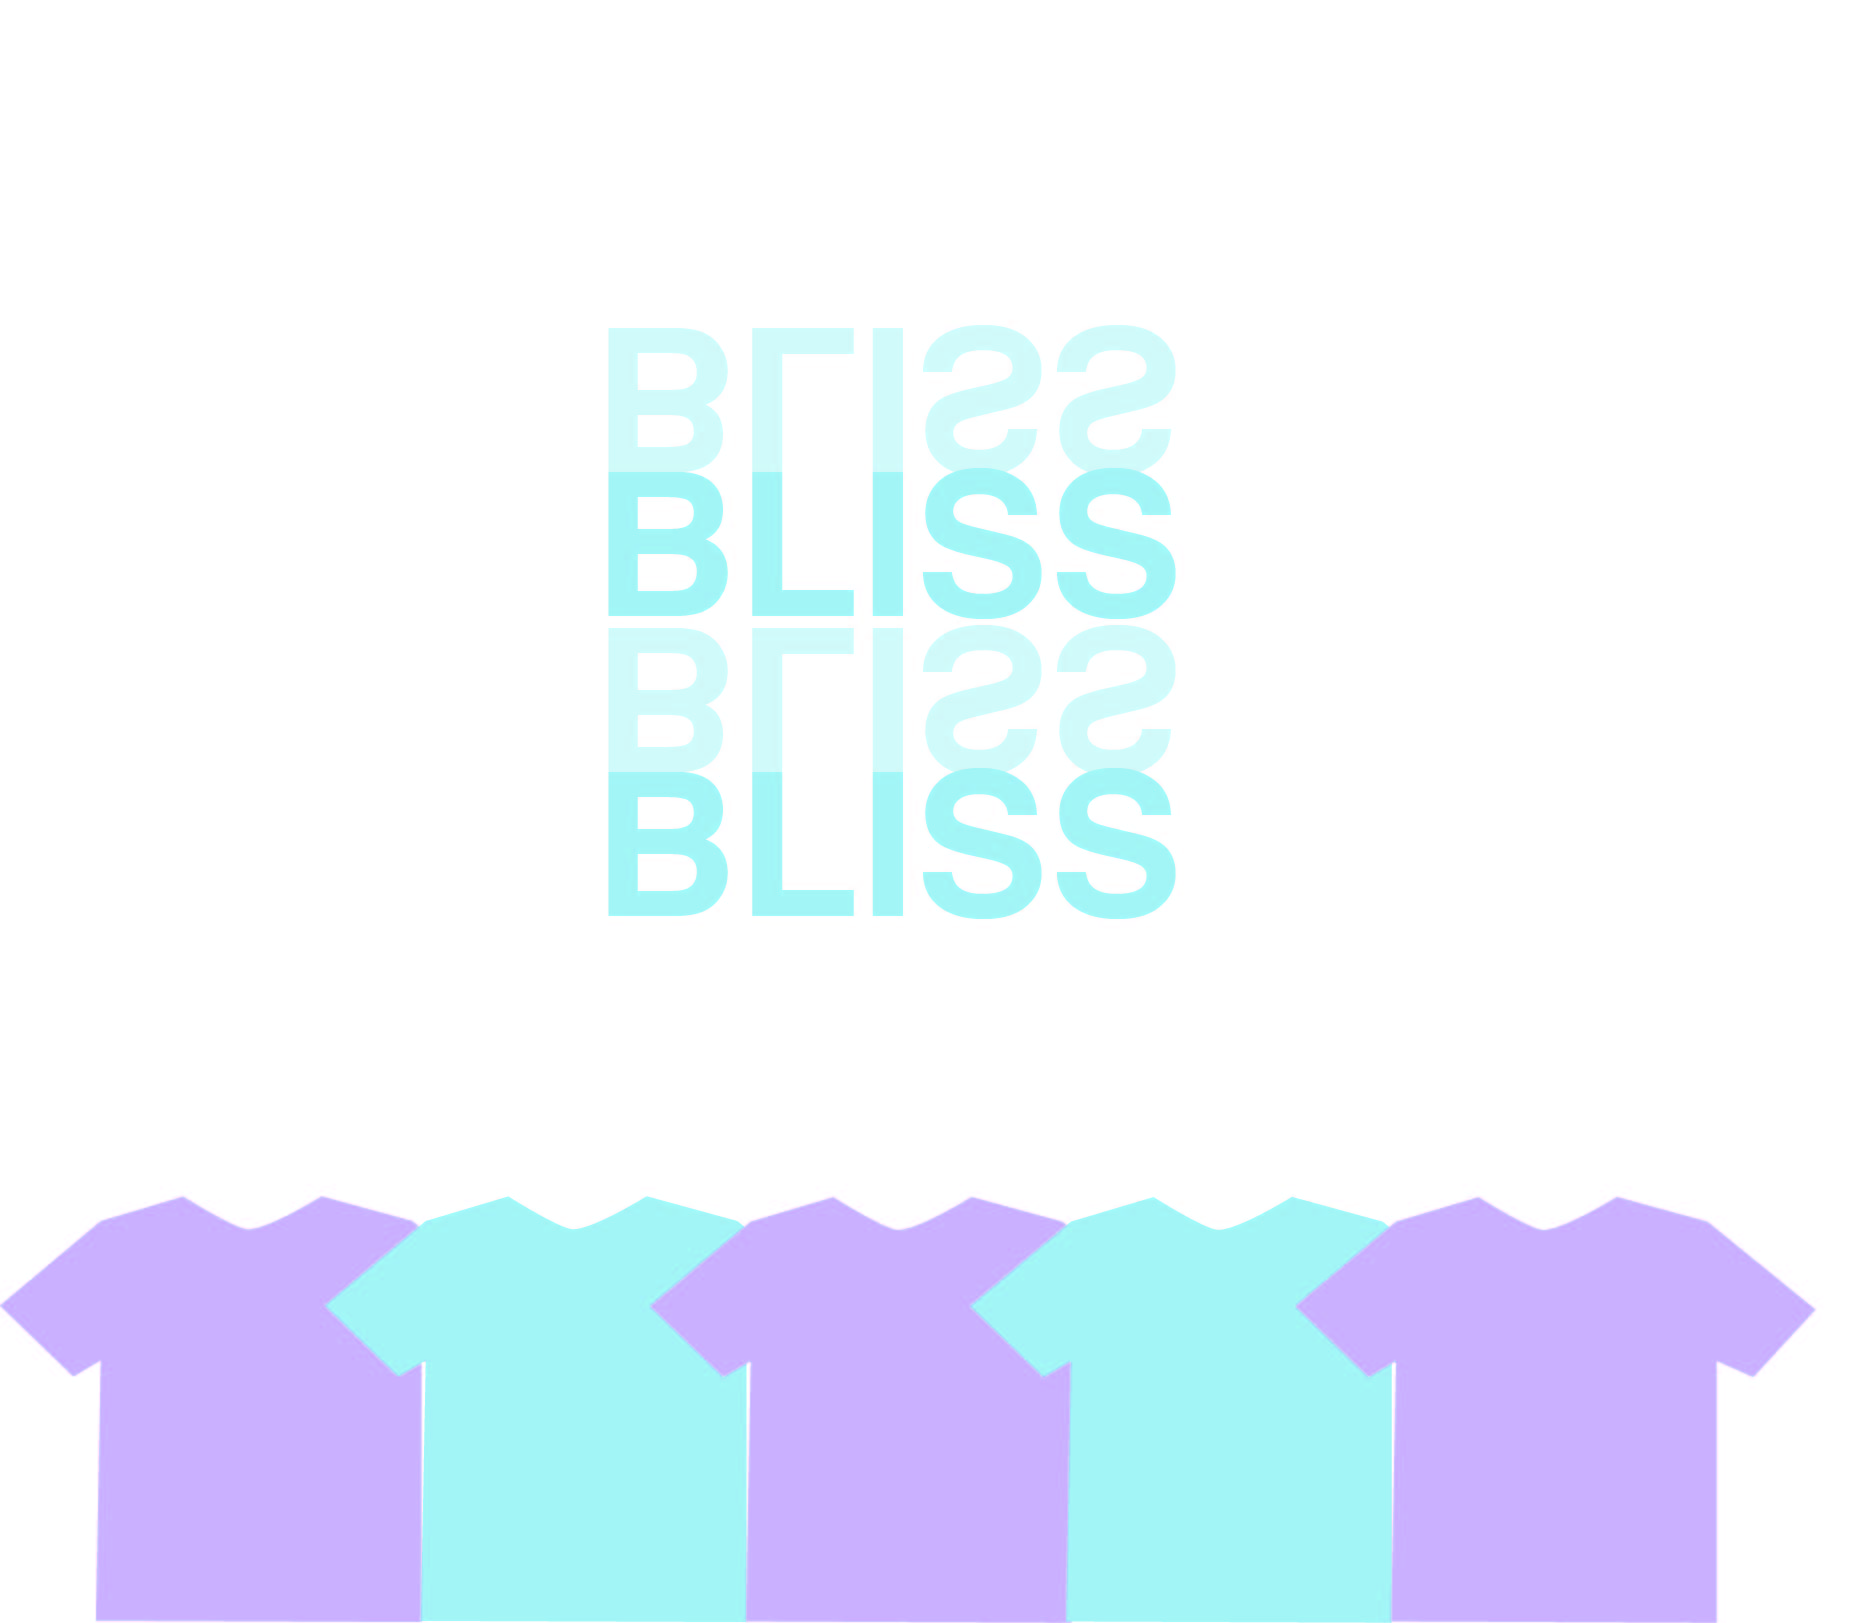 Bliss - Side Project